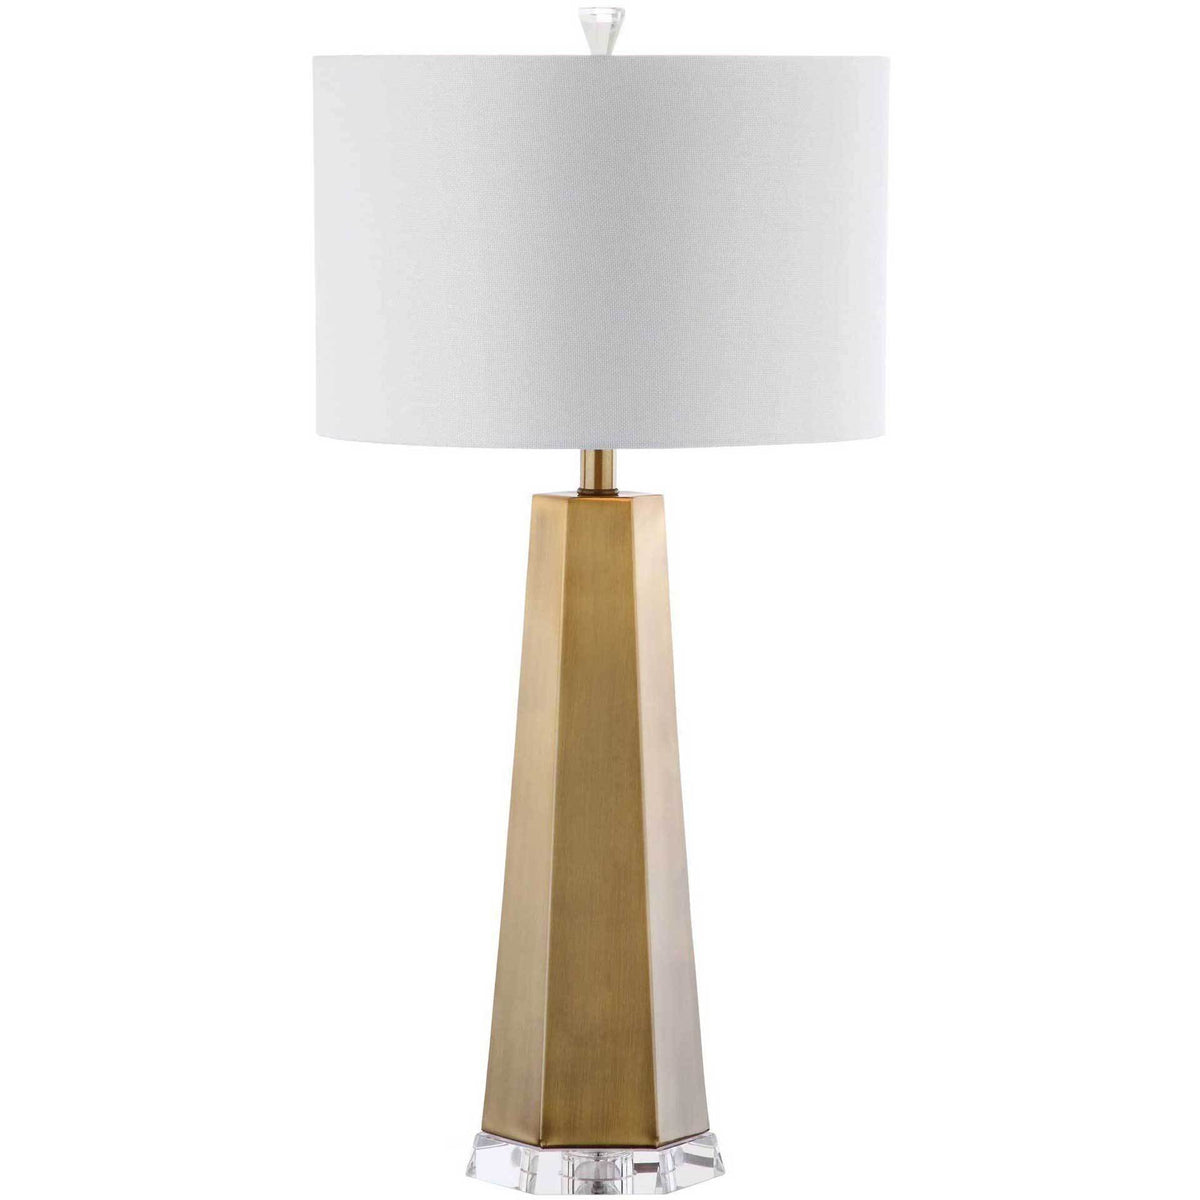 Audrey Table Lamp Brass Gold (Set of 2)